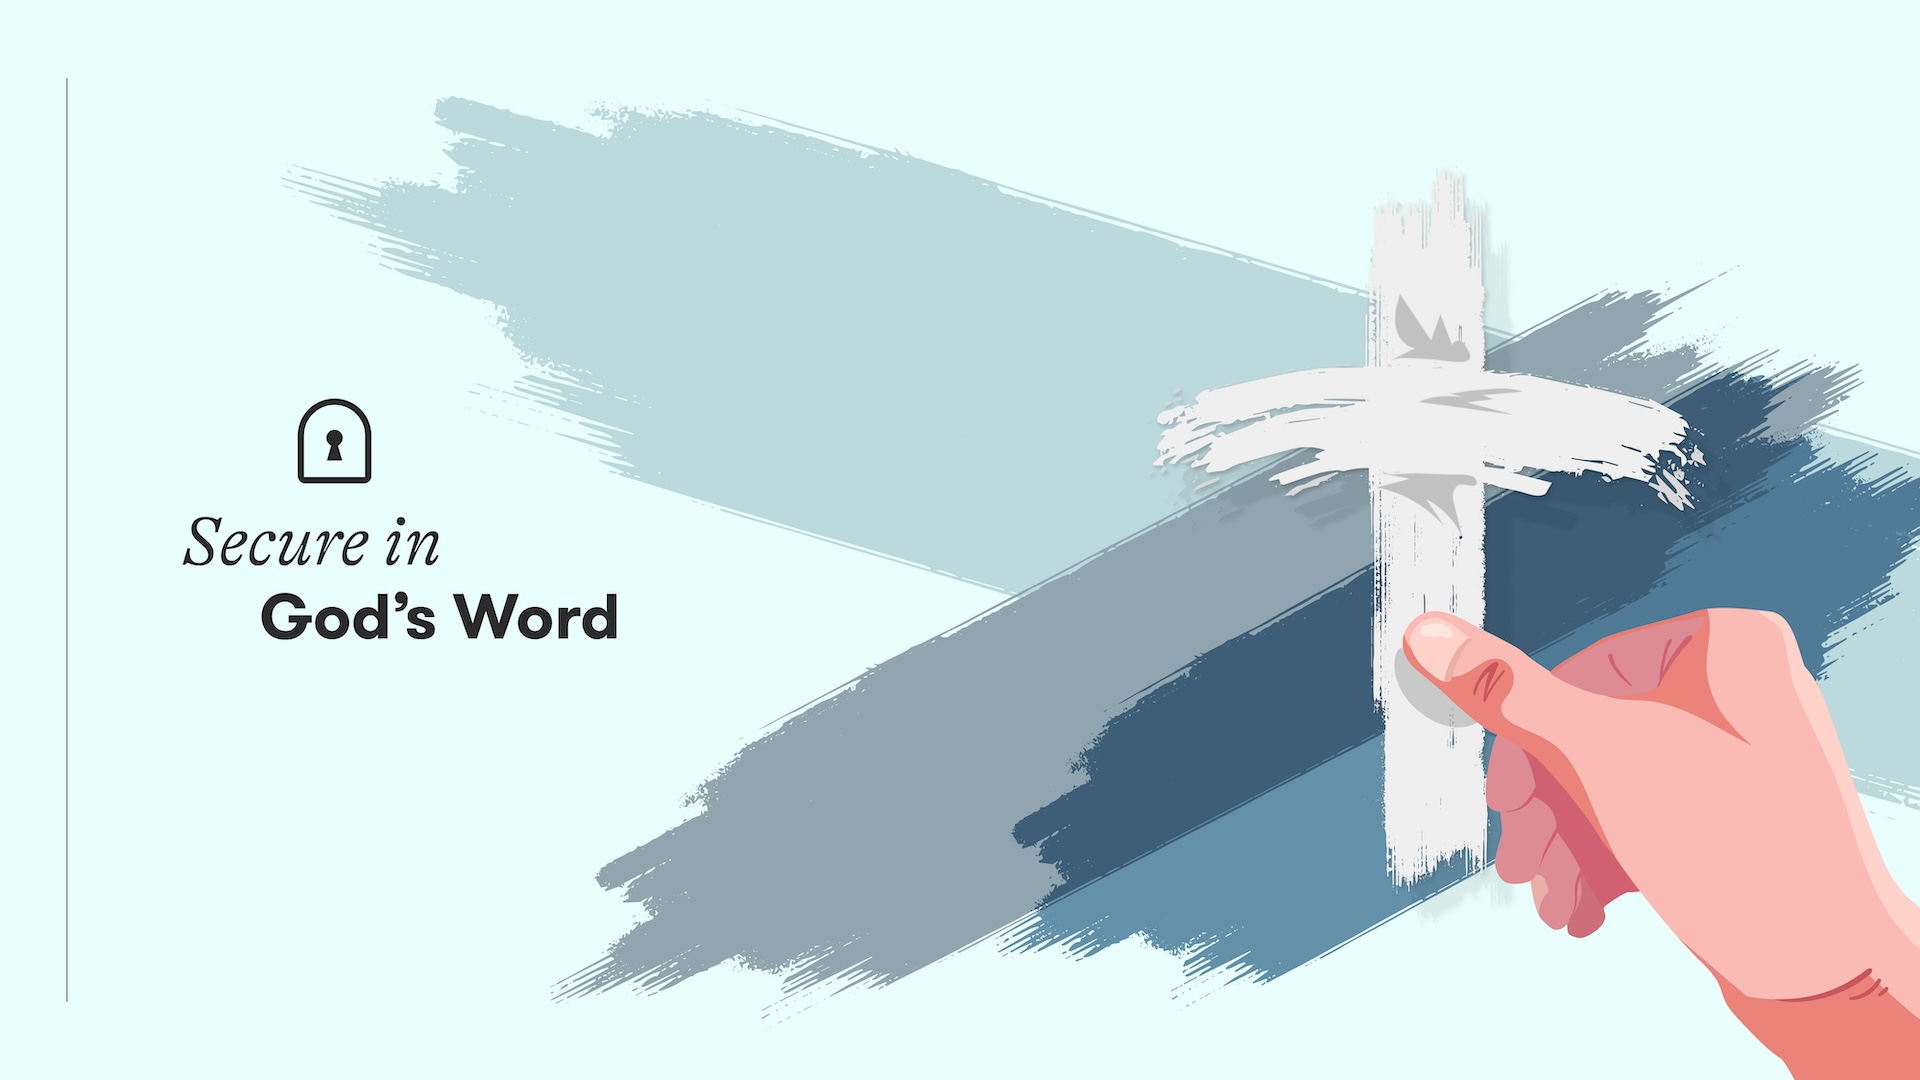 “Secure in God’s Word”